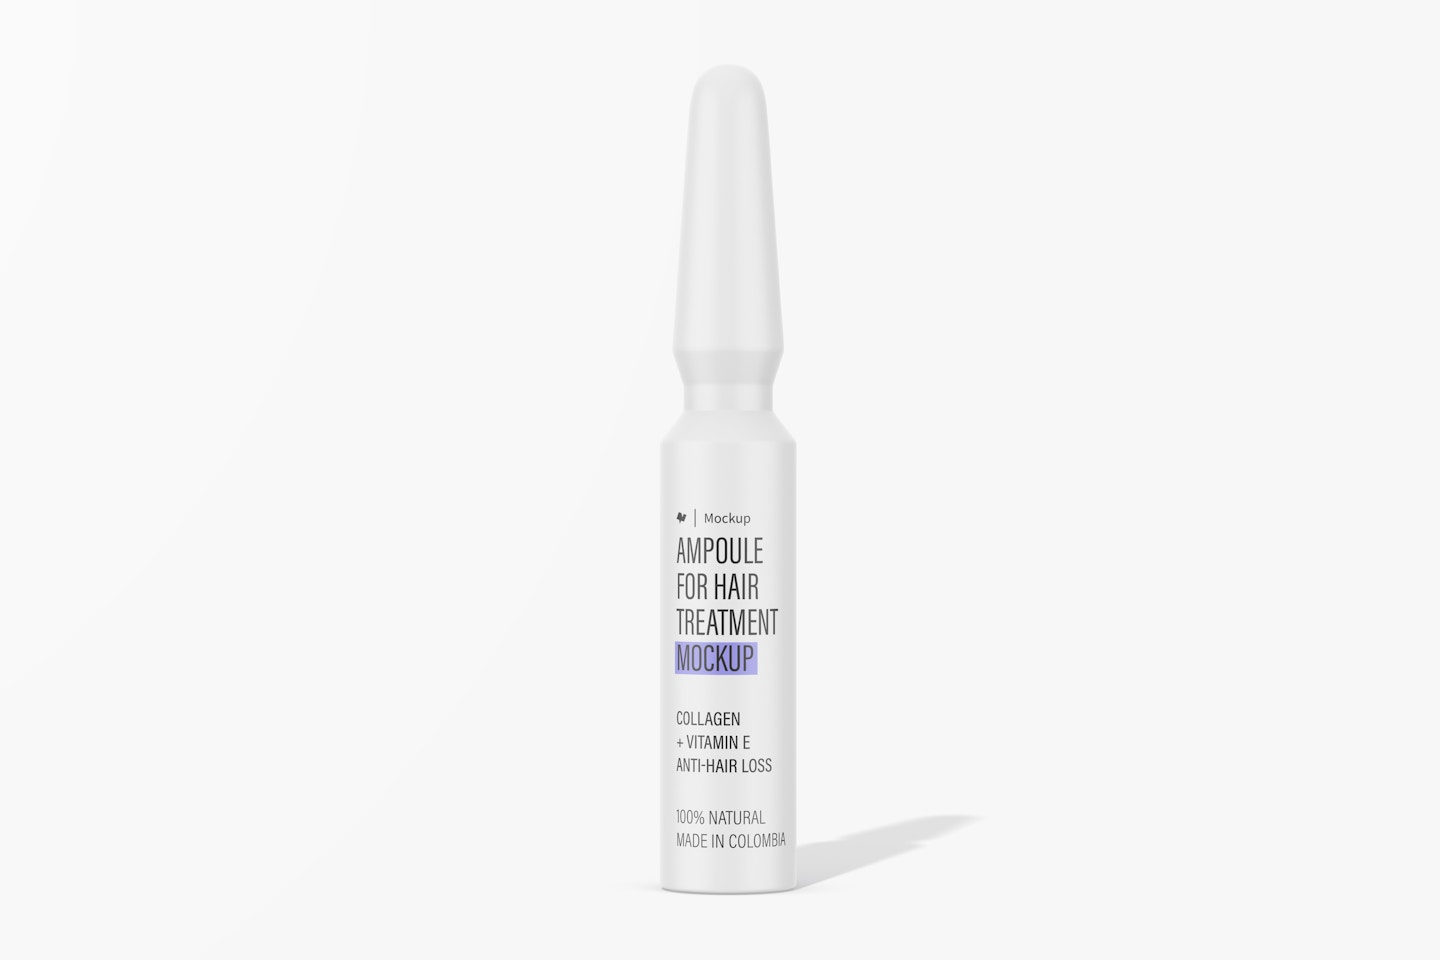 Ampoule for Hair Treatment Mockup, Front View